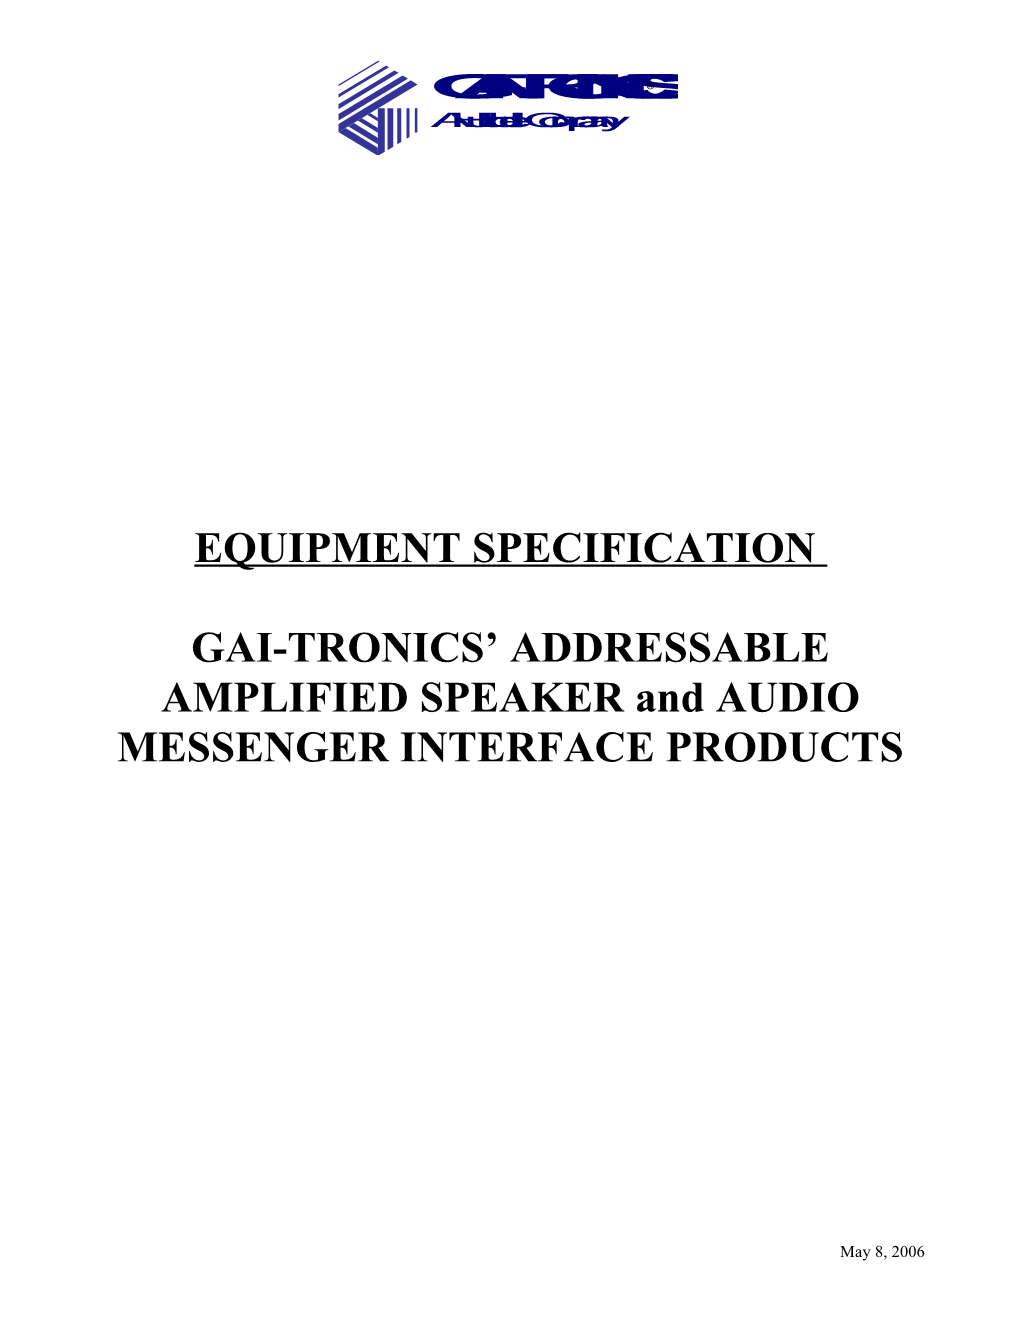 GAI-TRONICS ADDRESSABLE AMPLIFIED SPEAKER and AUDIO MESSENGER INTERFACE PRODUCTS